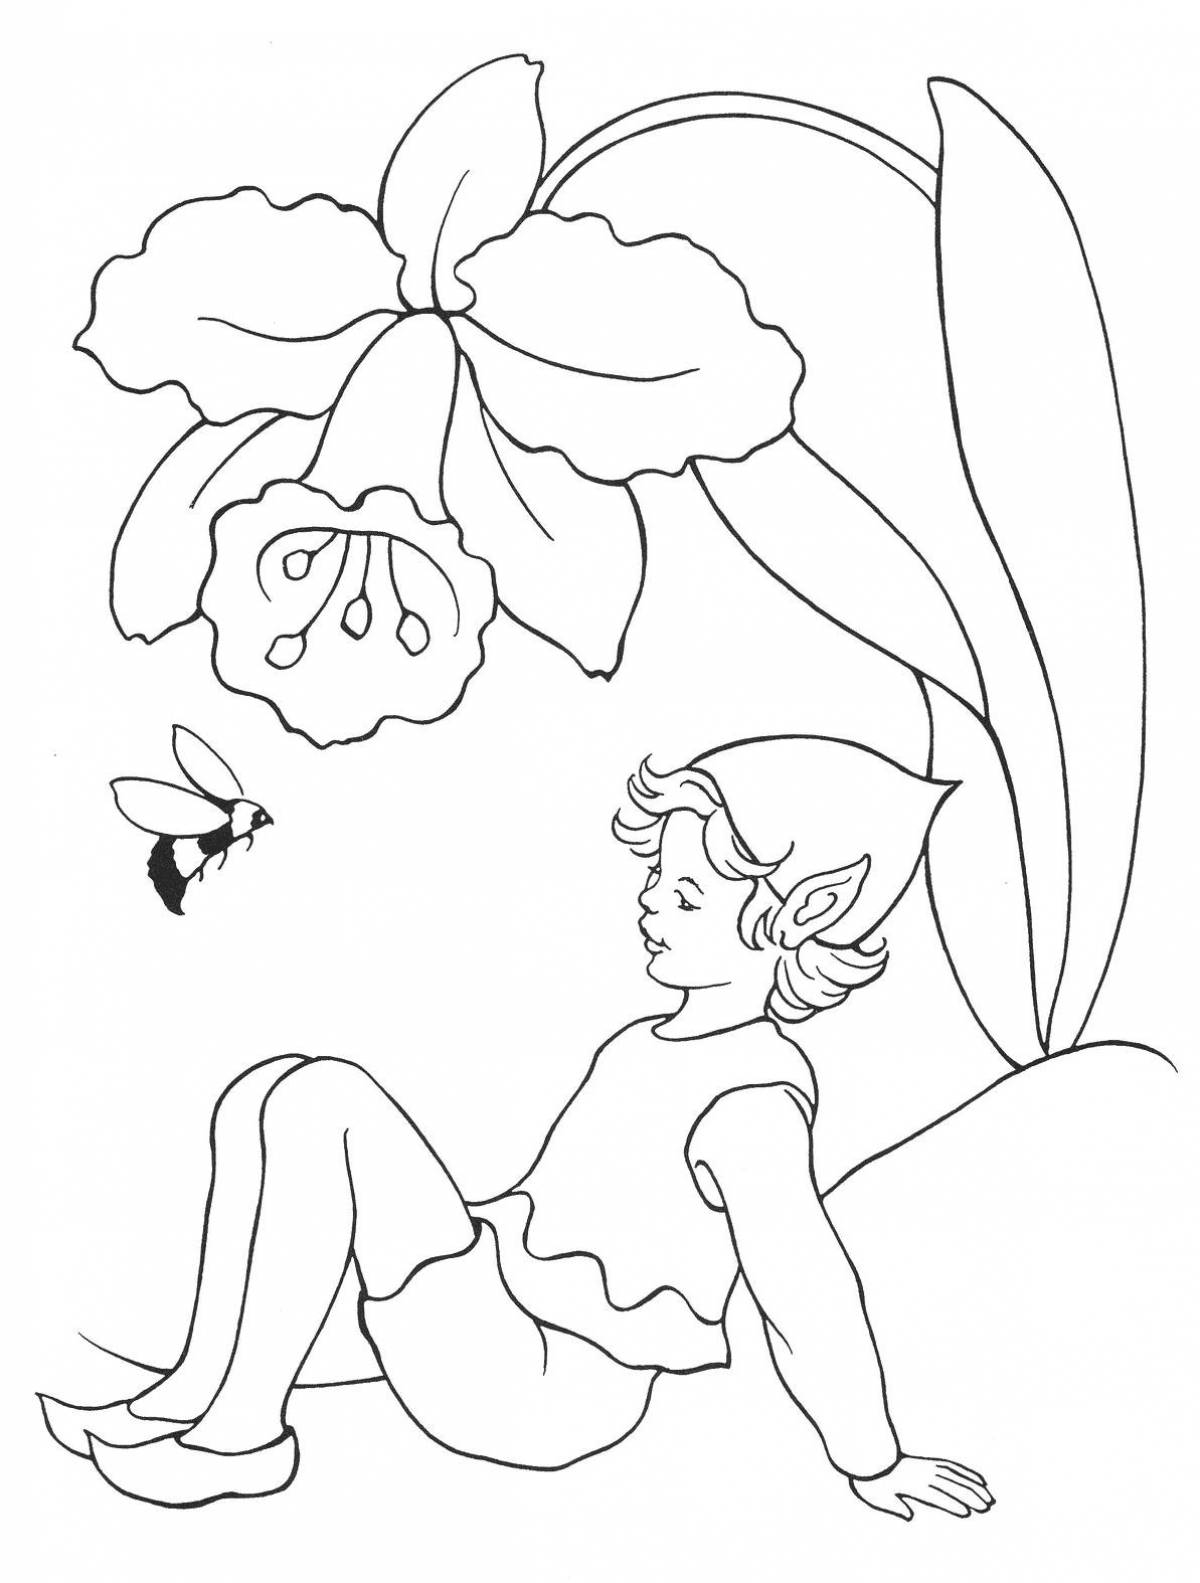 Elves coloring pages